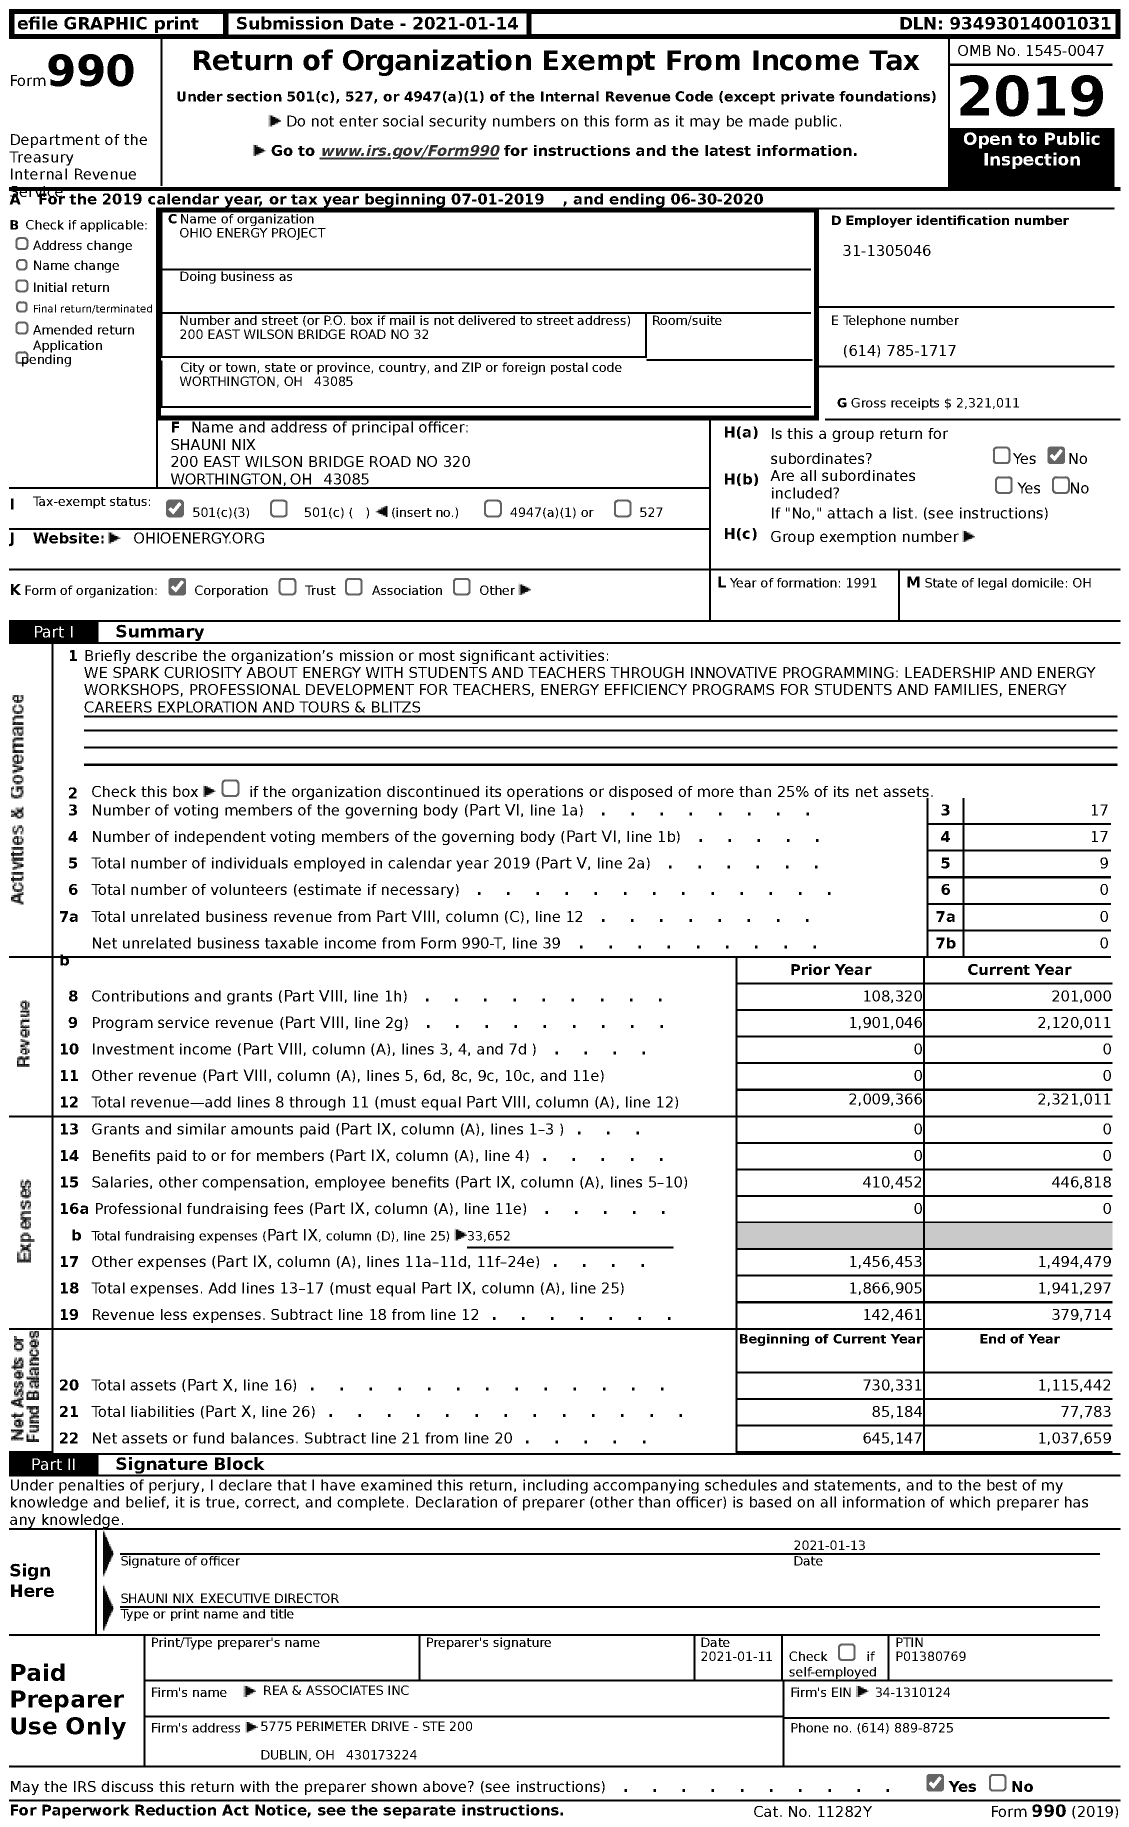 Image of first page of 2019 Form 990 for Ohio Energy Project (OEP)